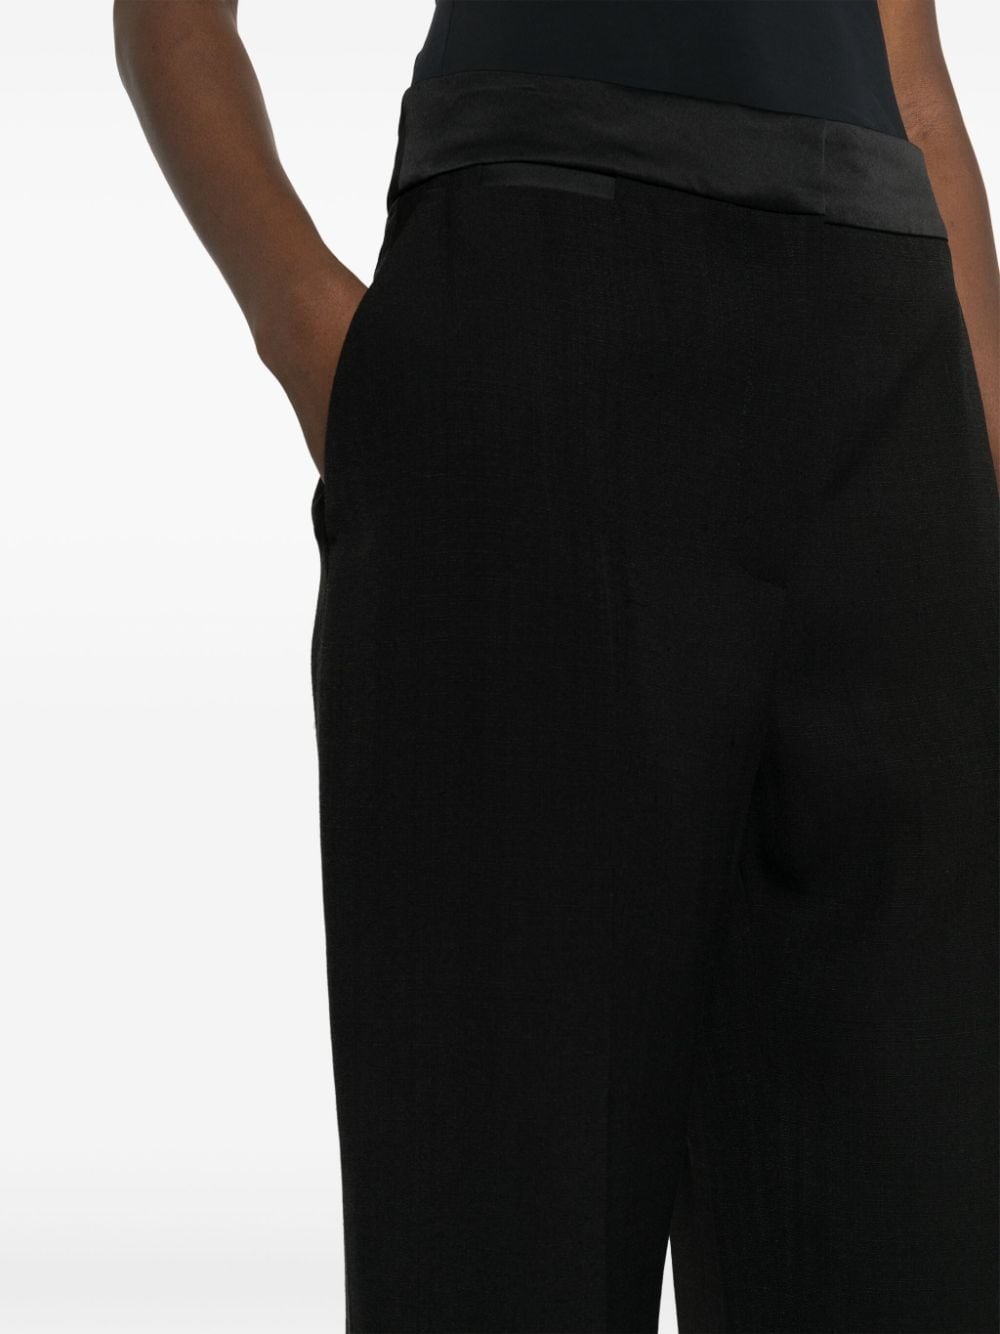 pressed-crease long-length straight-leg trousers - 5